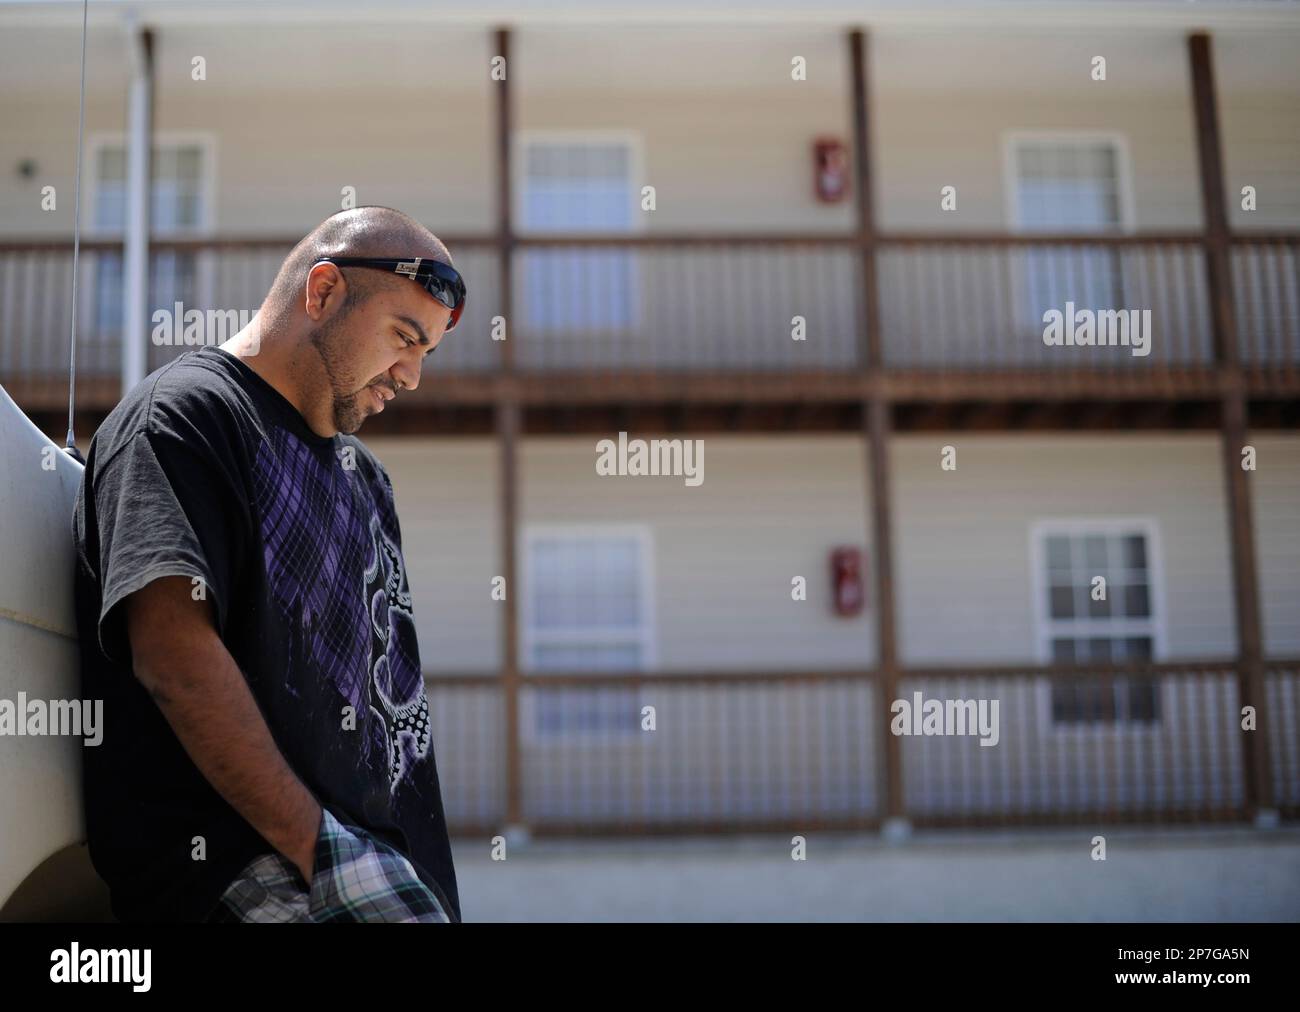 Jesus Saldana, 24, stands outside of the Walnut Creek Apartments where he  was visiting a friend in Dalton, Ga. on April 29, 2010. Saldana has been  unemployed for the last two years.